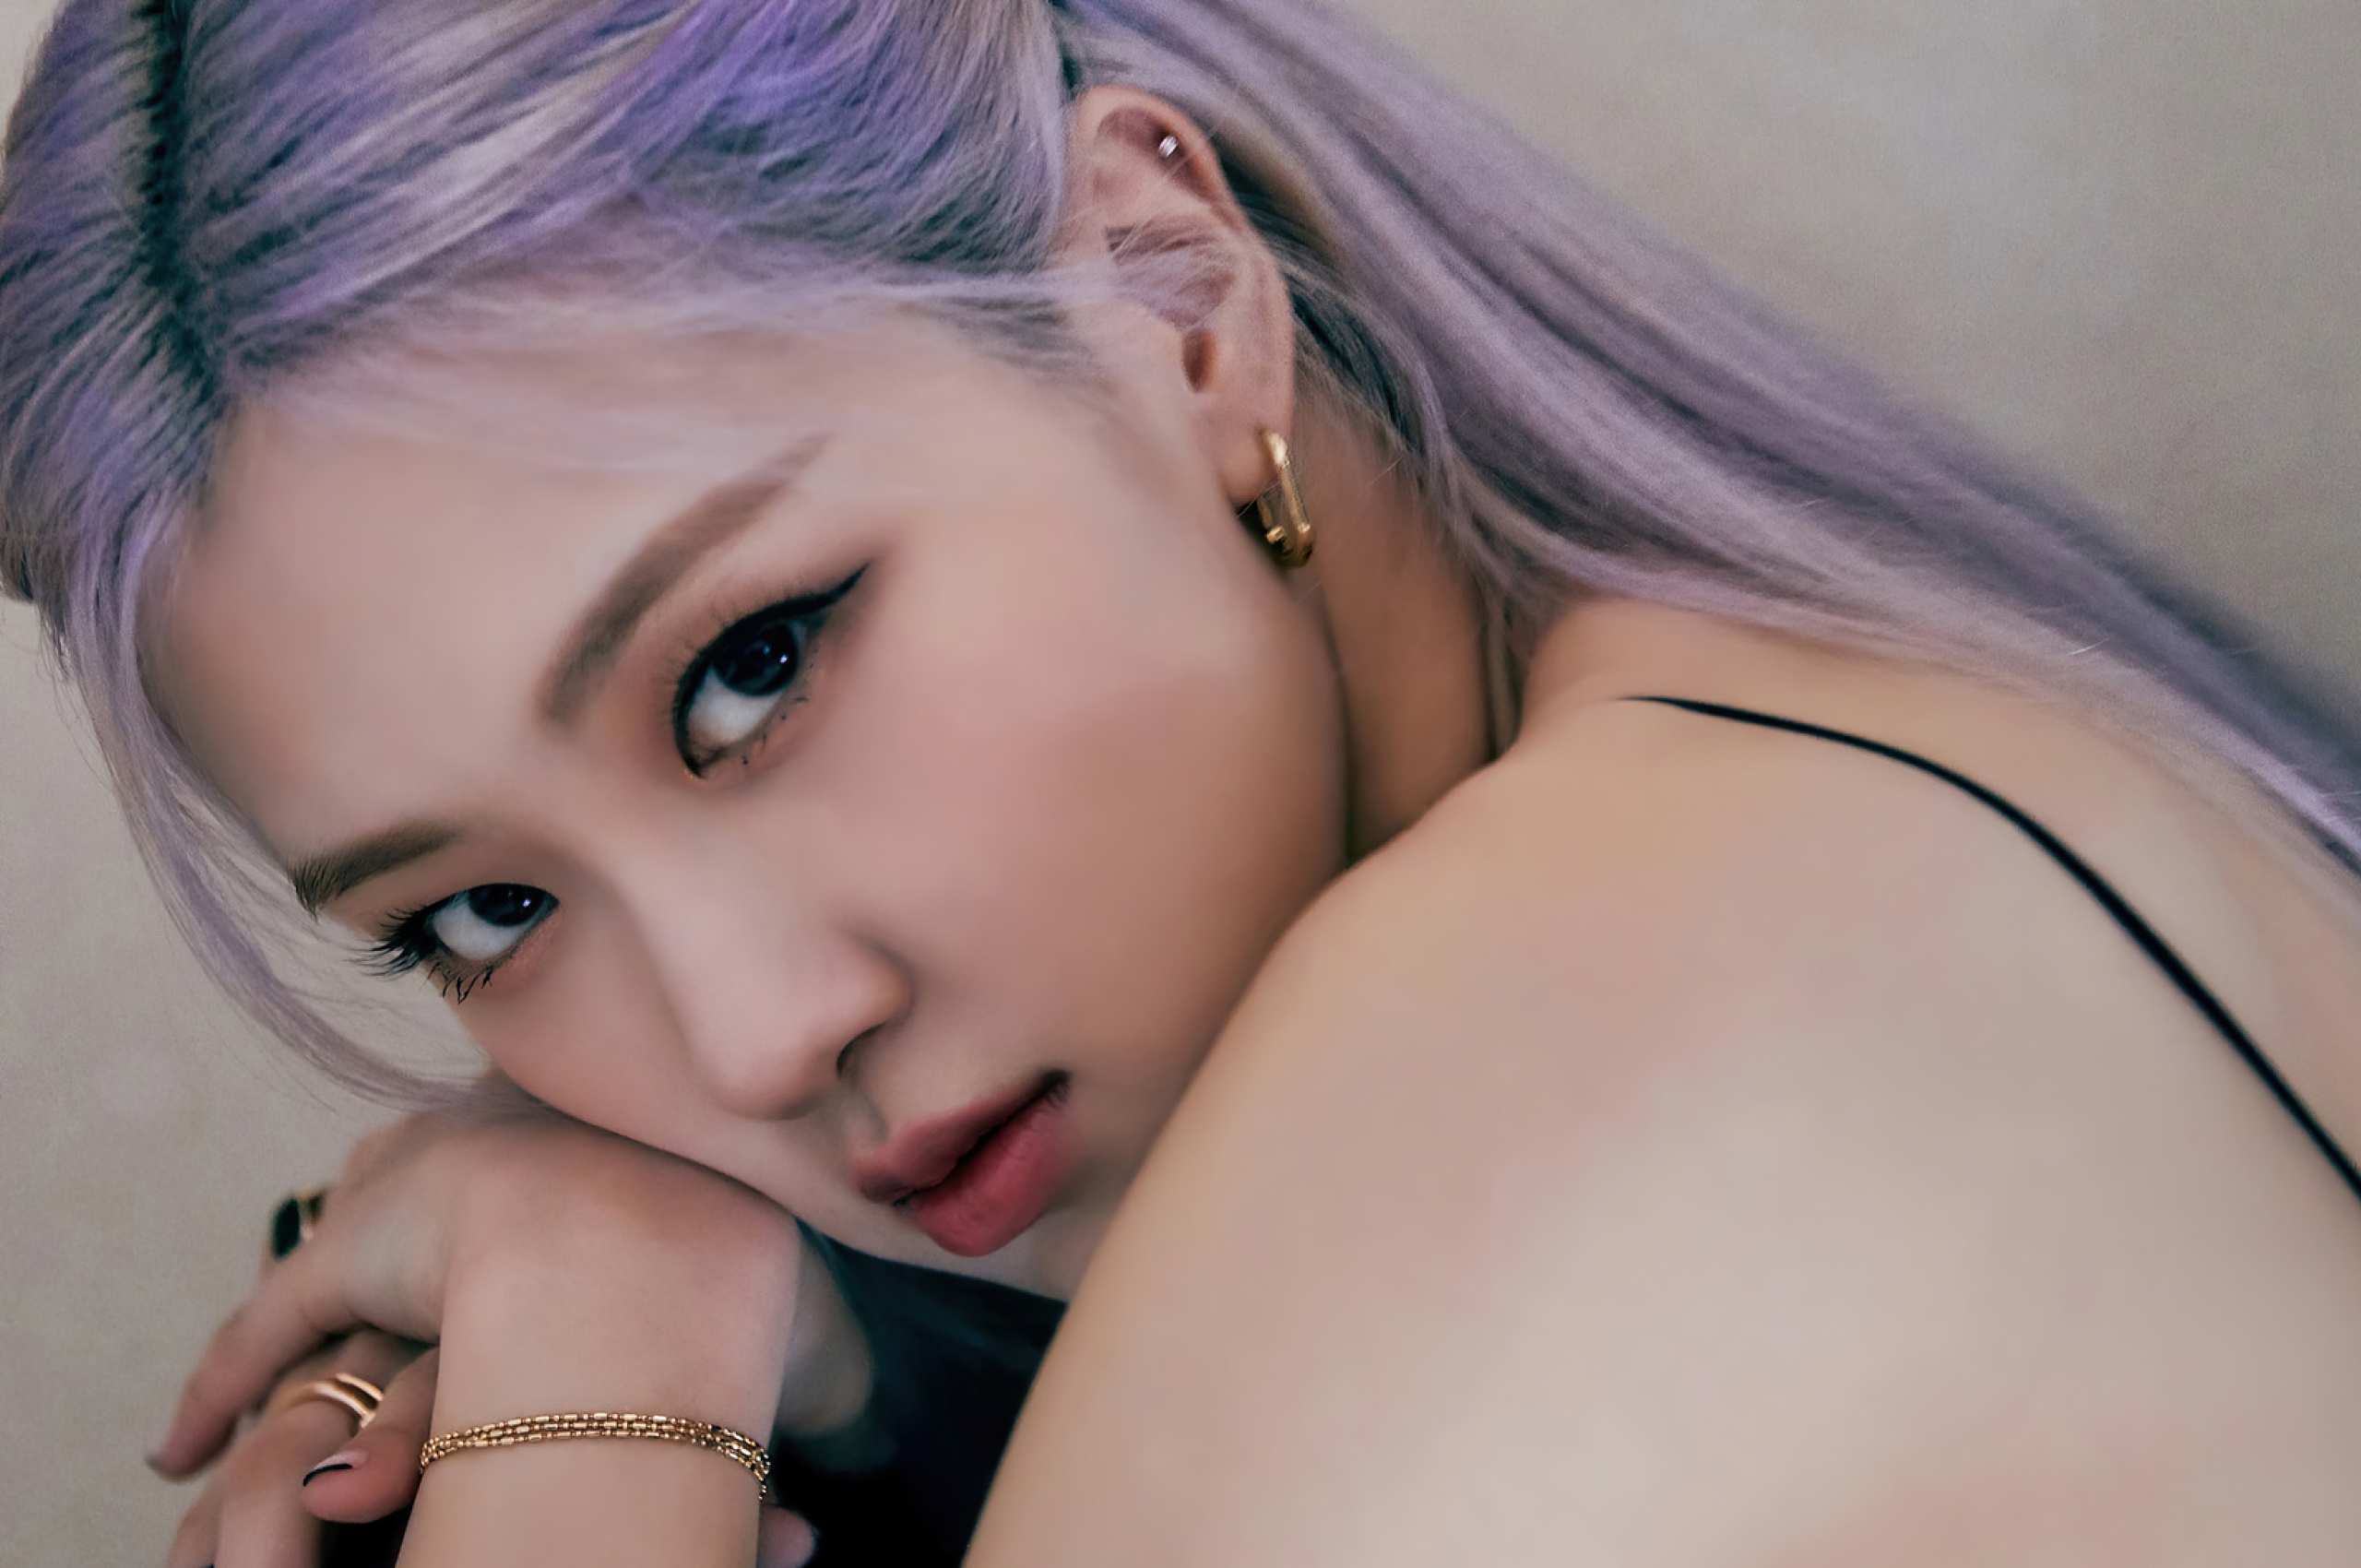 A woman with purple hair is posing for the camera - BLACKPINK